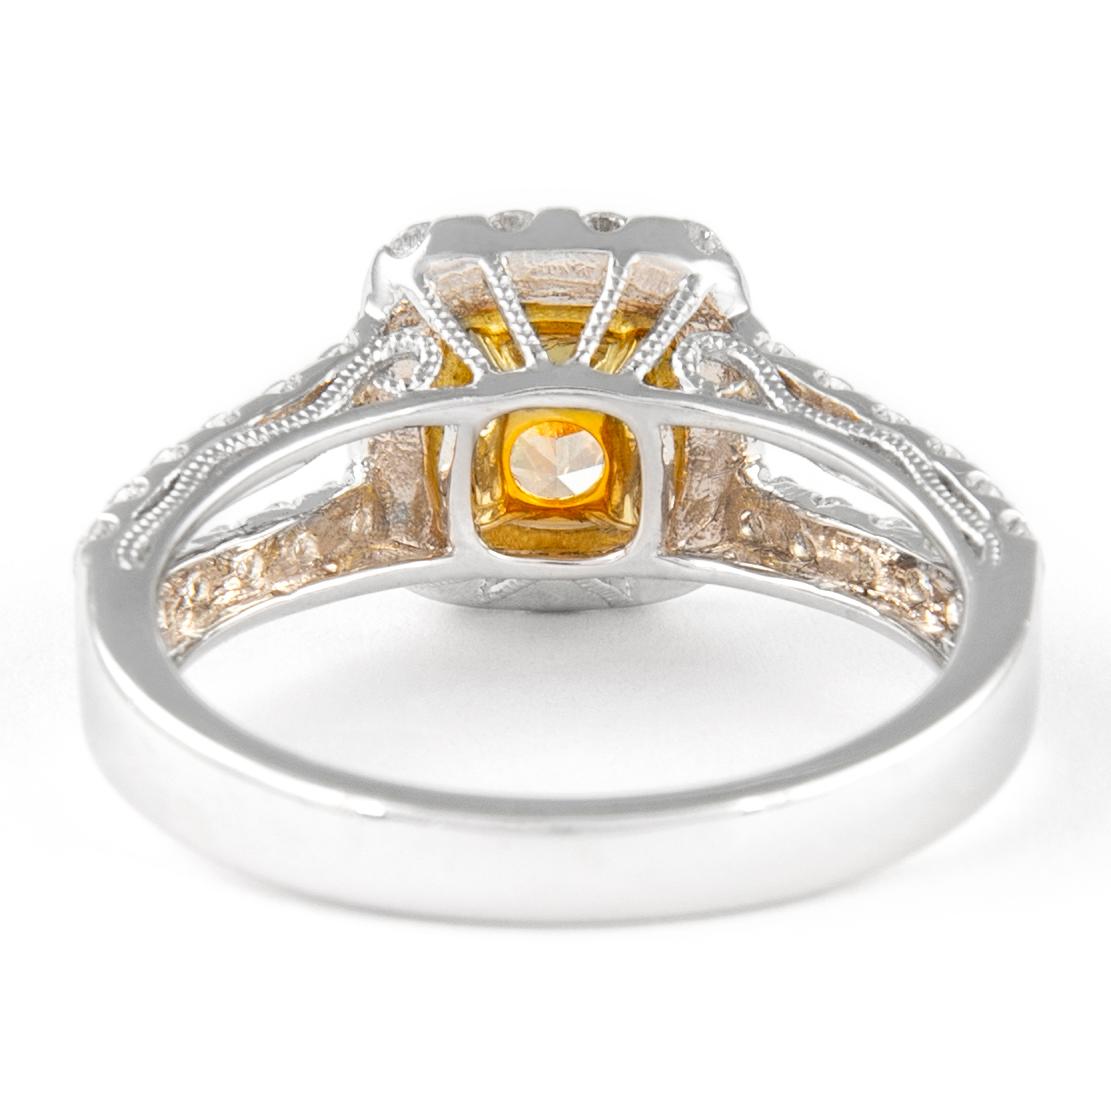 Alexander 1.79ctt Fancy Yellow Cushion VS1 Diamond with Halo Ring 18k Two Tone In New Condition For Sale In BEVERLY HILLS, CA